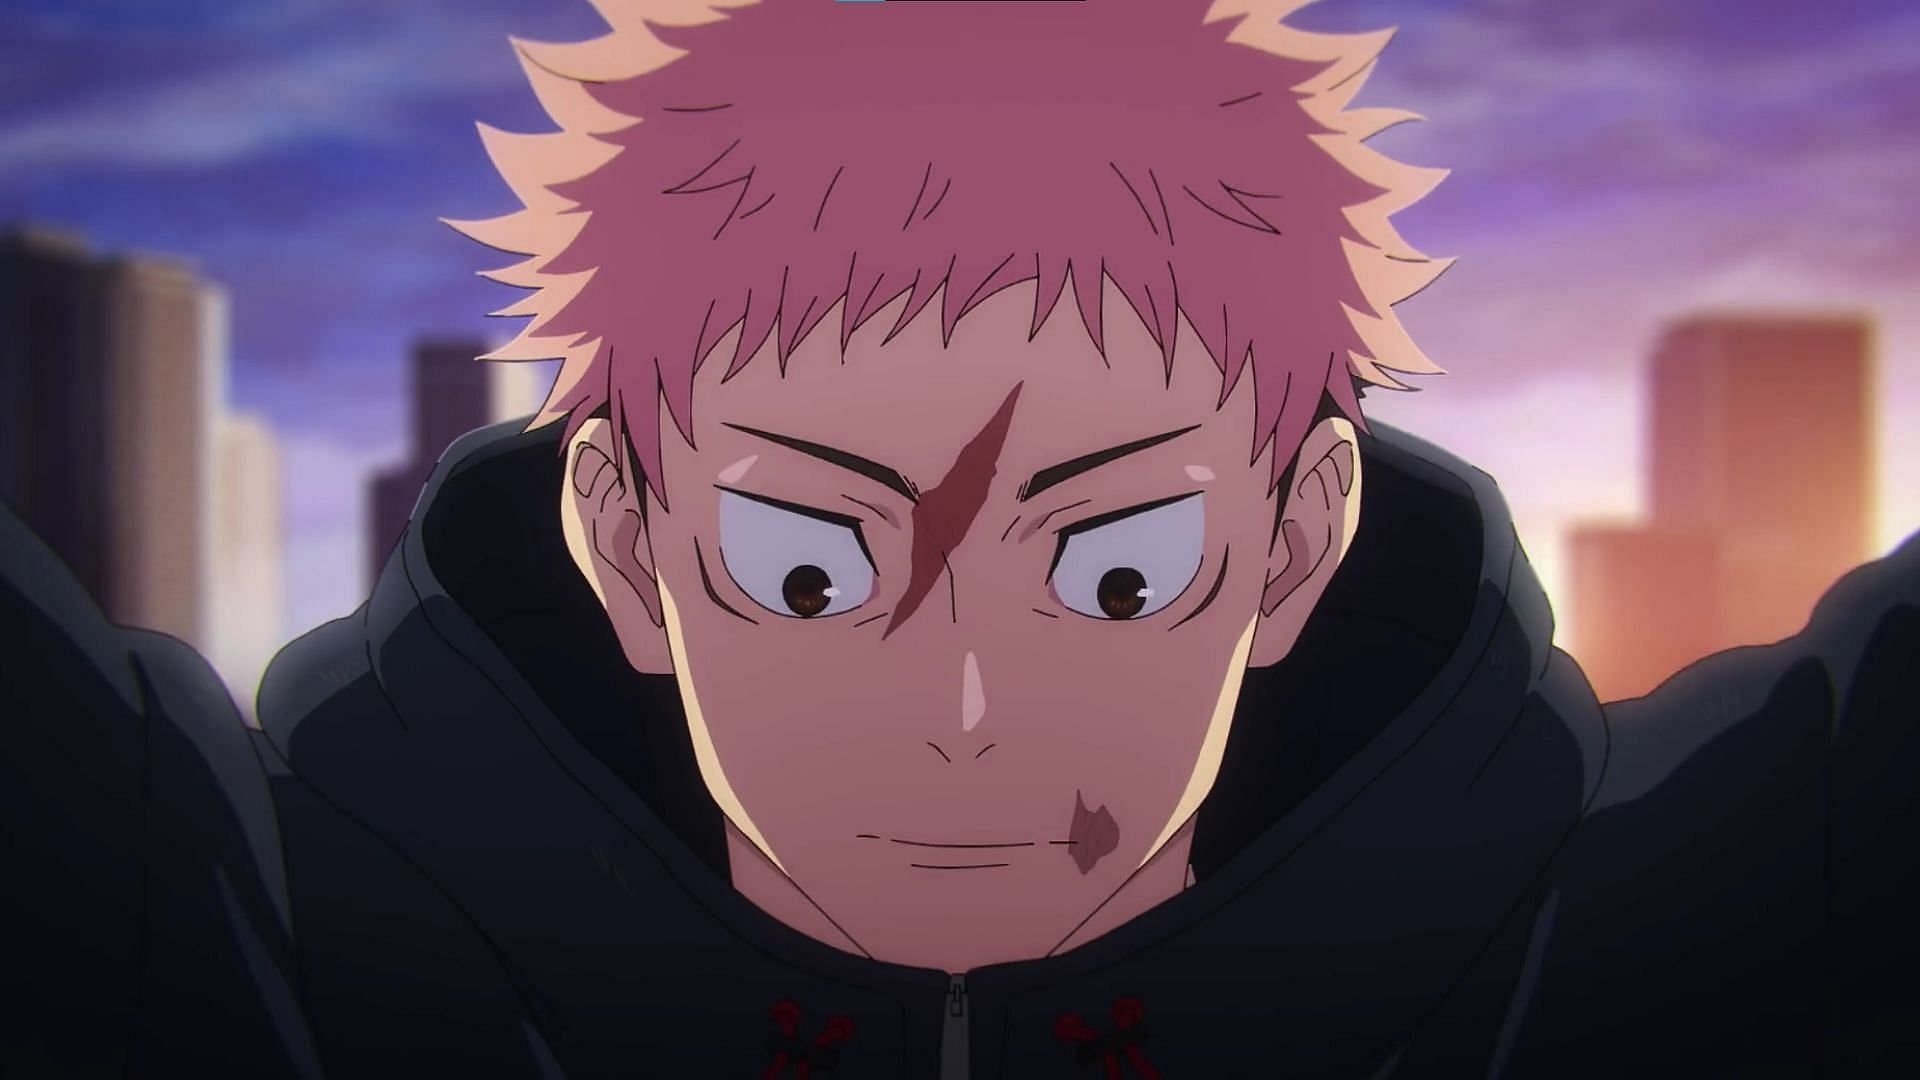 Jujutsu Kaisen fans find a new nickname from Yuji that